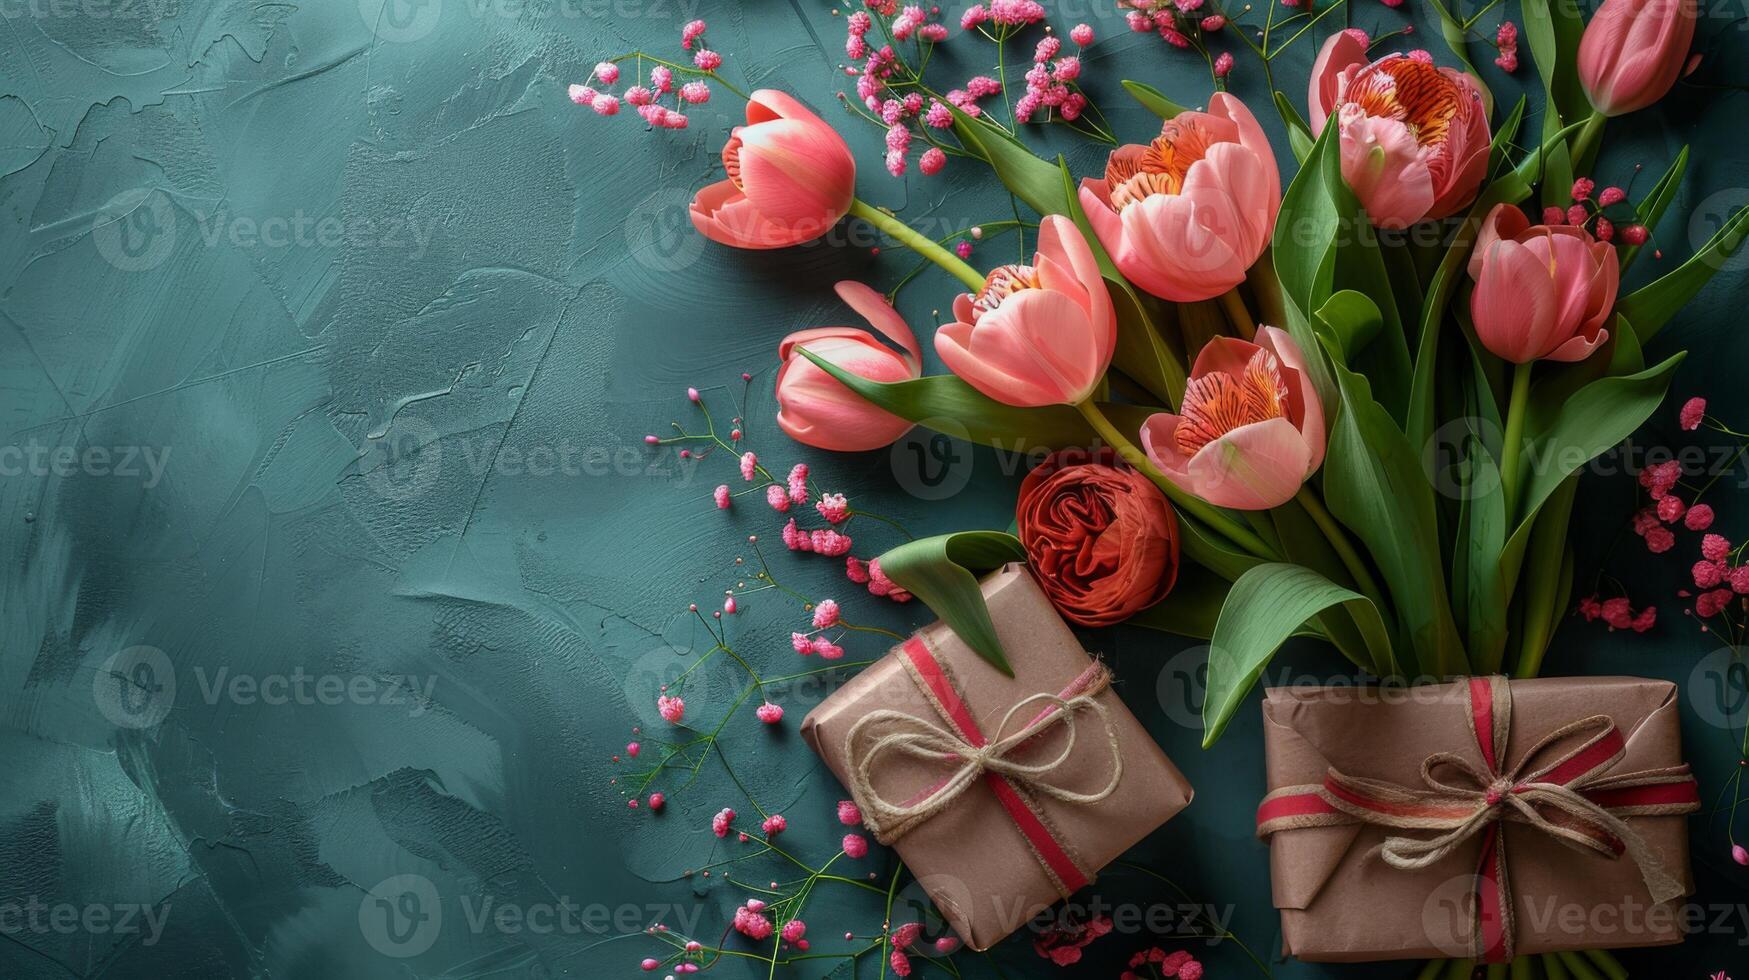 Elegant gifts wrapped in brown paper tied with red ribbon beside pink tulips and coral blossoms on a textured teal background, perfect for Mother's Day. photo